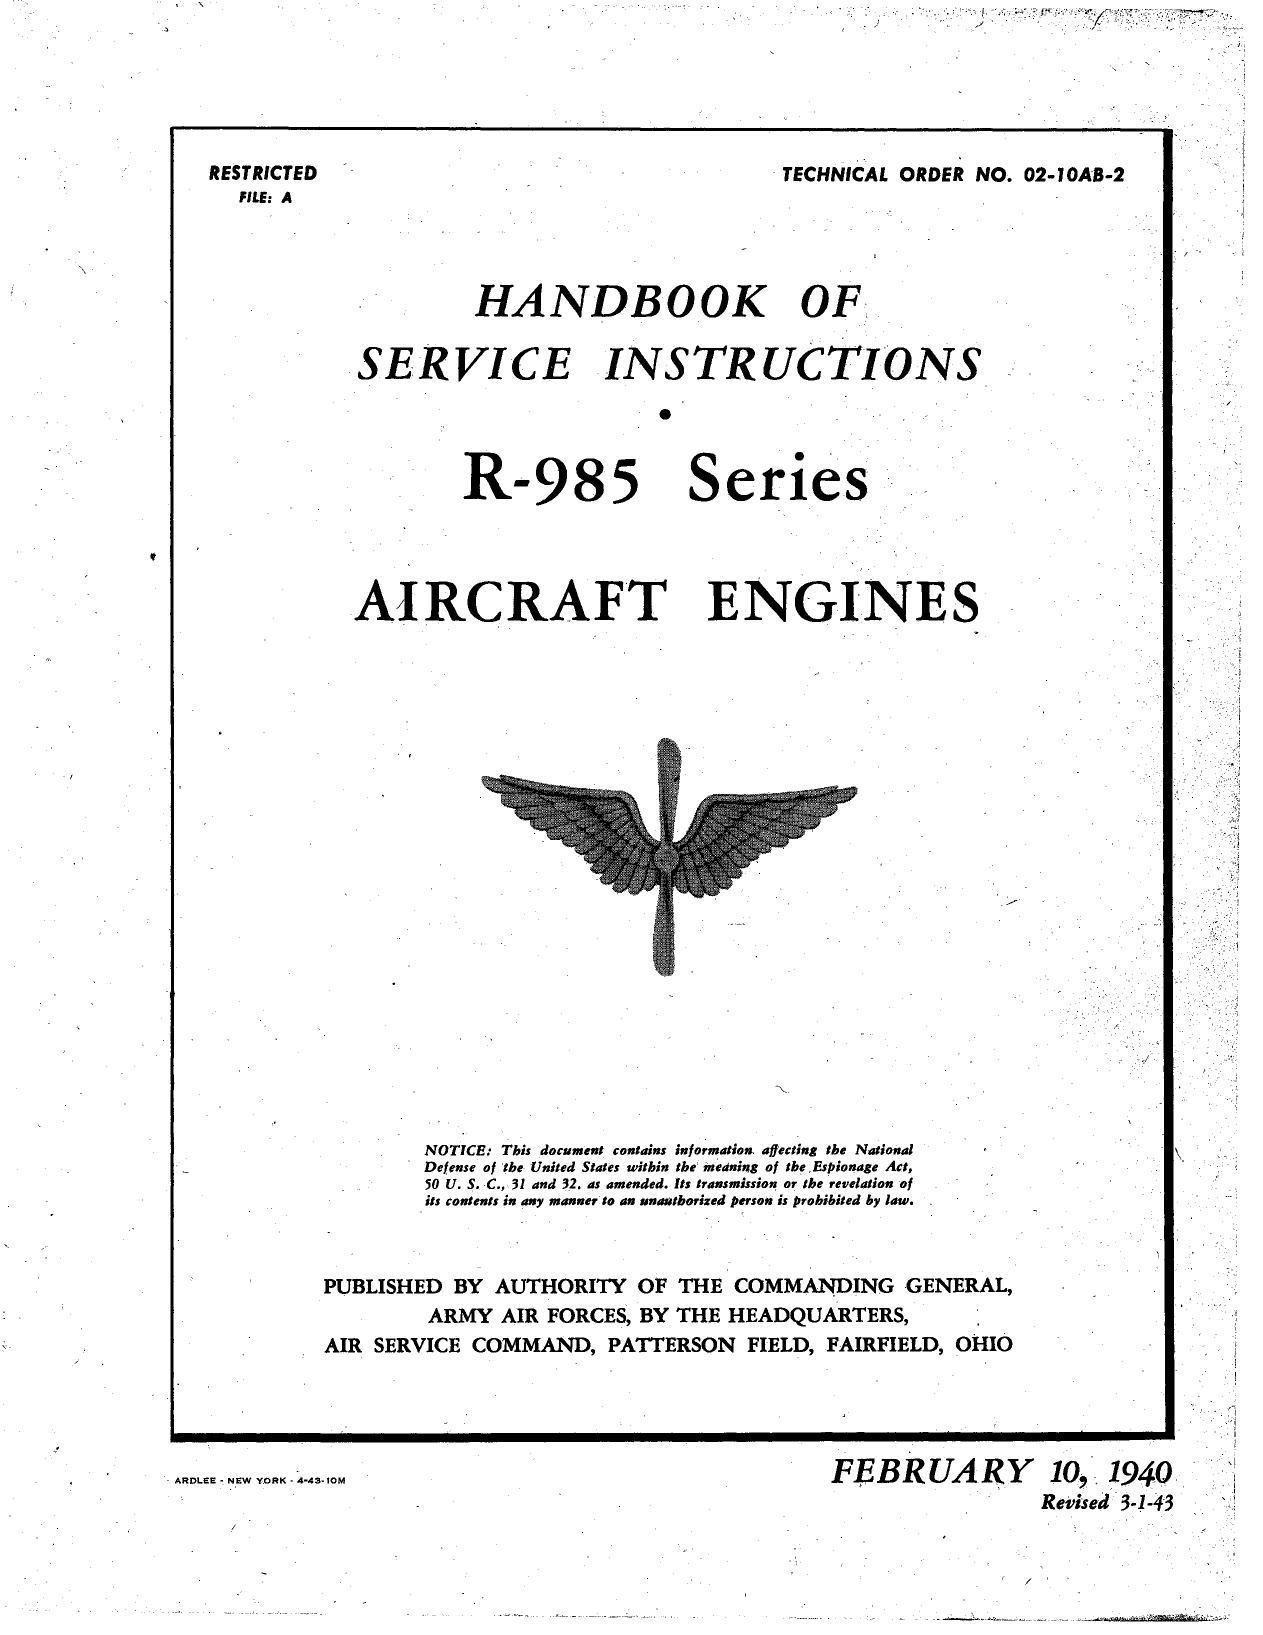 Sample page 1 from AirCorps Library document: Service Instructions - Engine - R-985